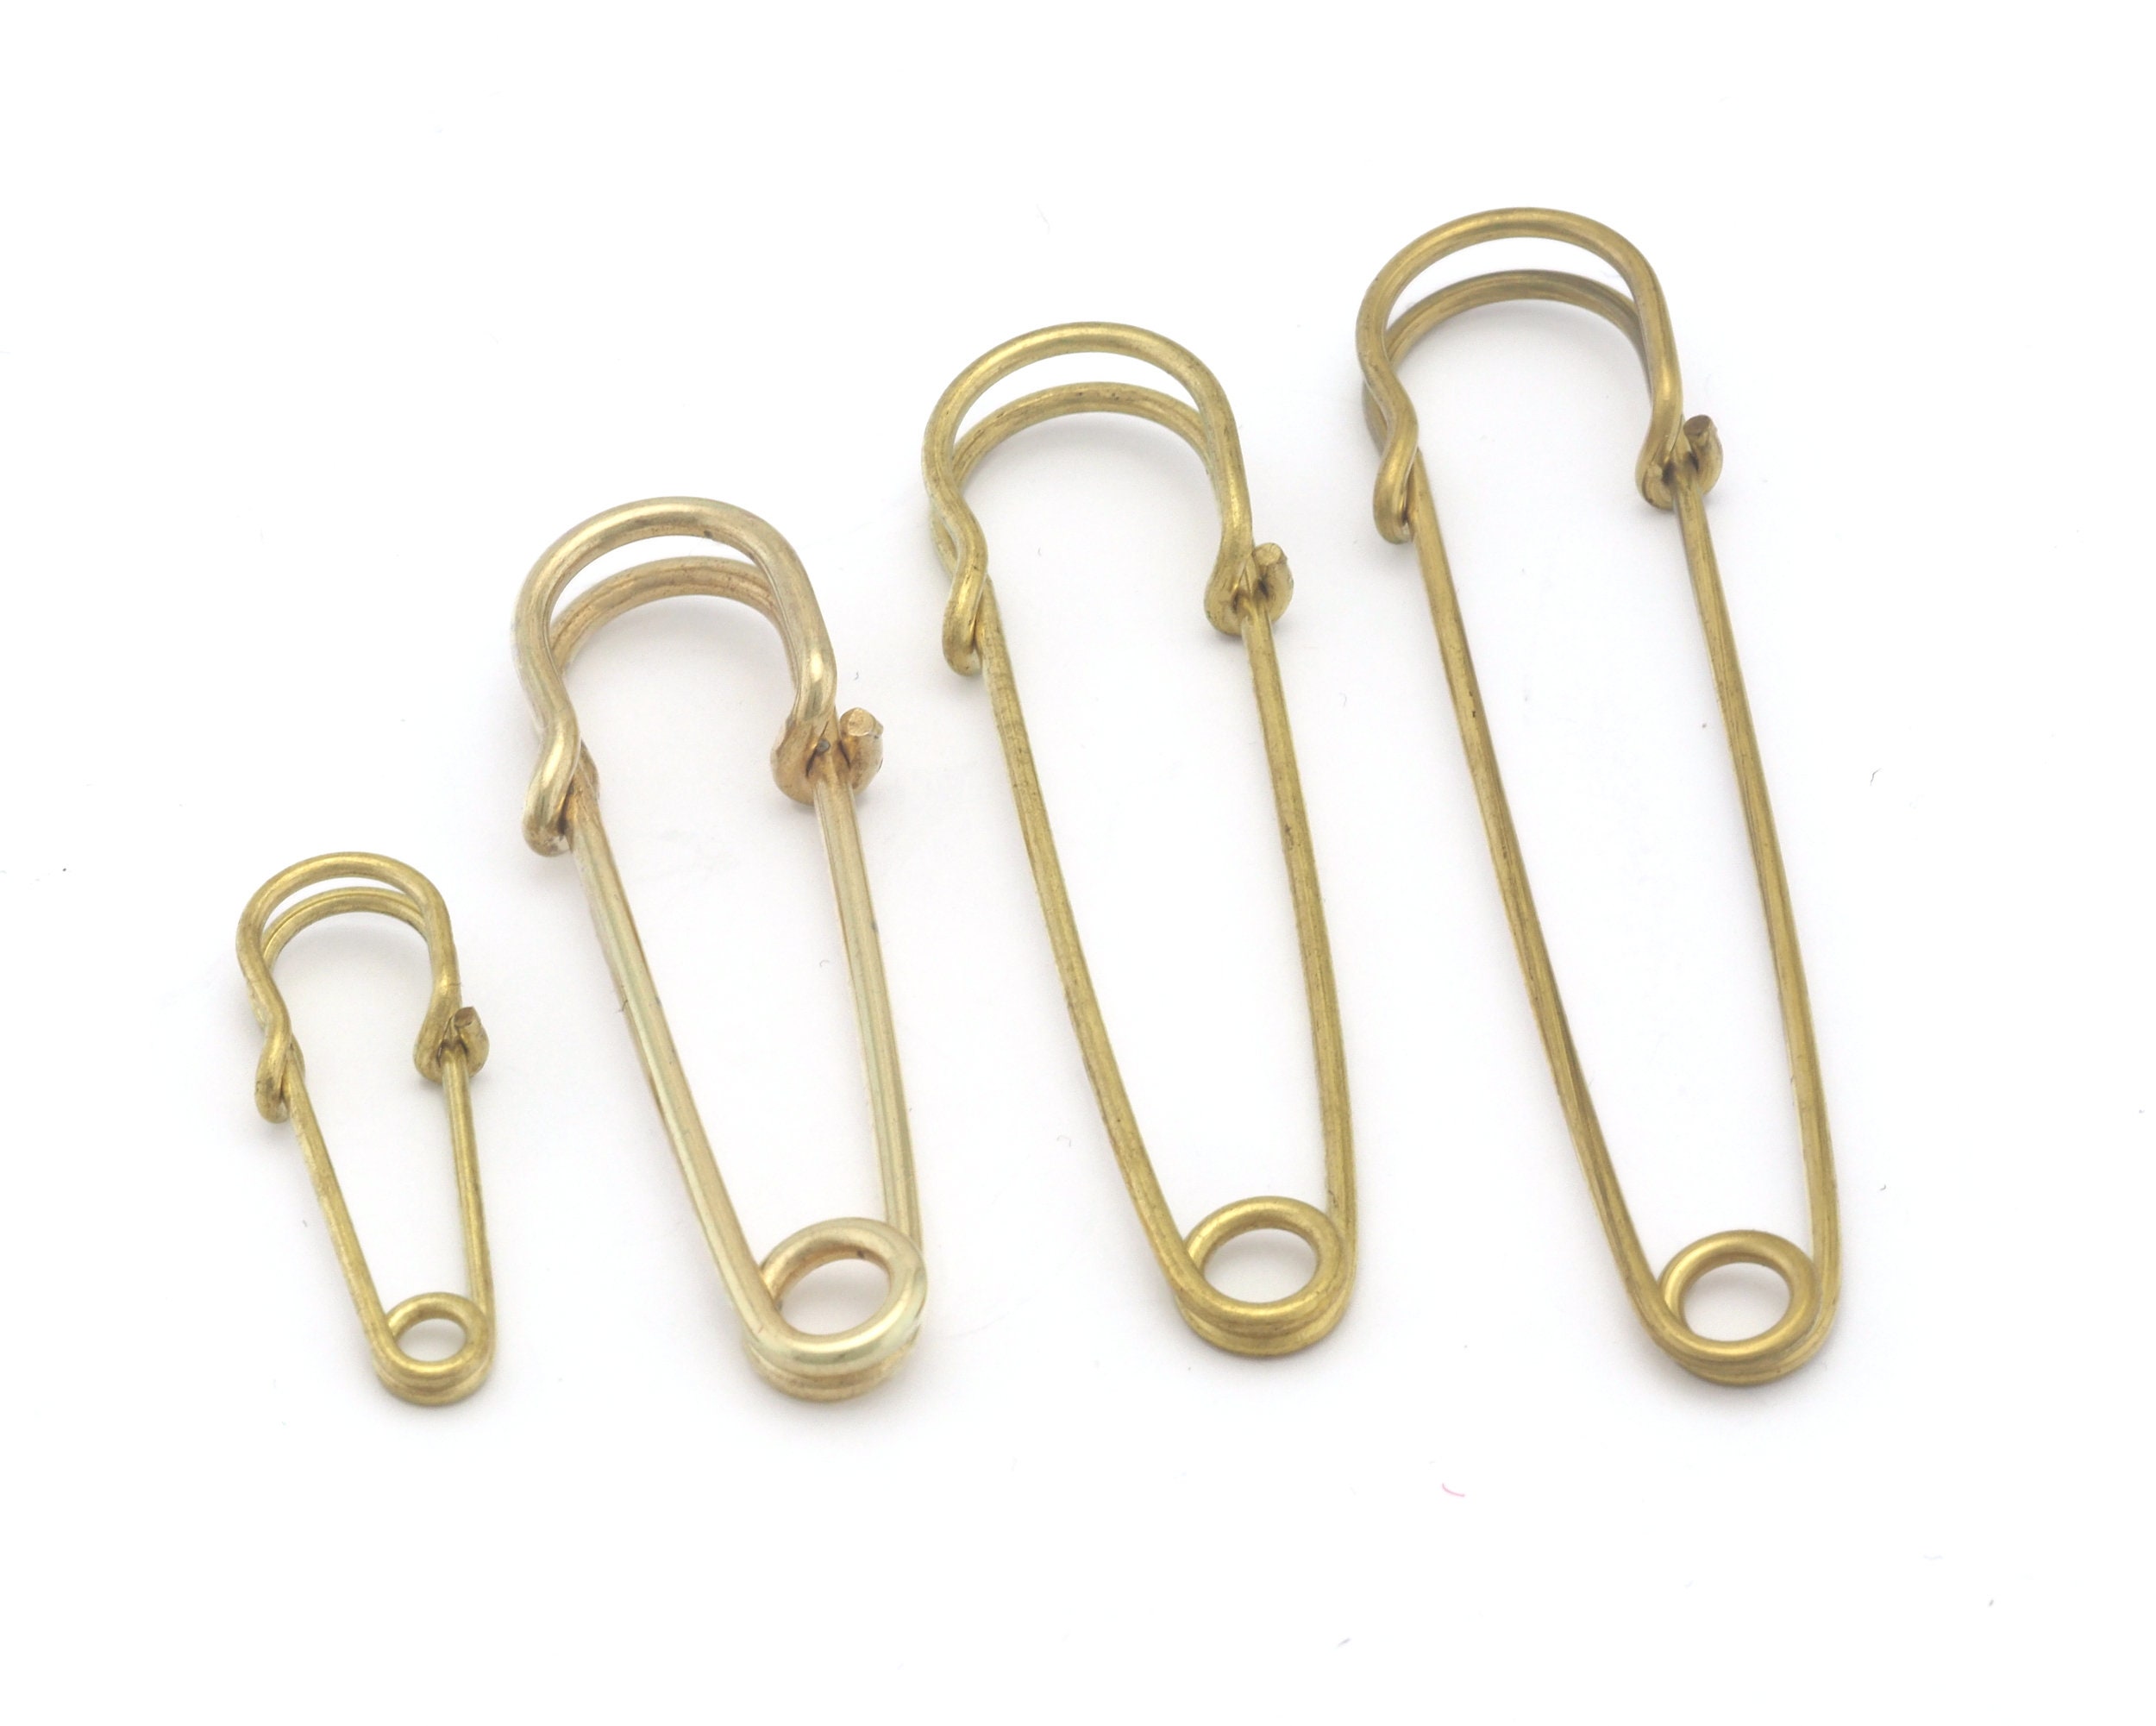 128mm Giant Safety Pin Big Over Sized Laundry Pins Kilt Pins Brooch Pin  Back Safety Pin for Sewing Jewelry Making Stitch Makers Pins Charm 